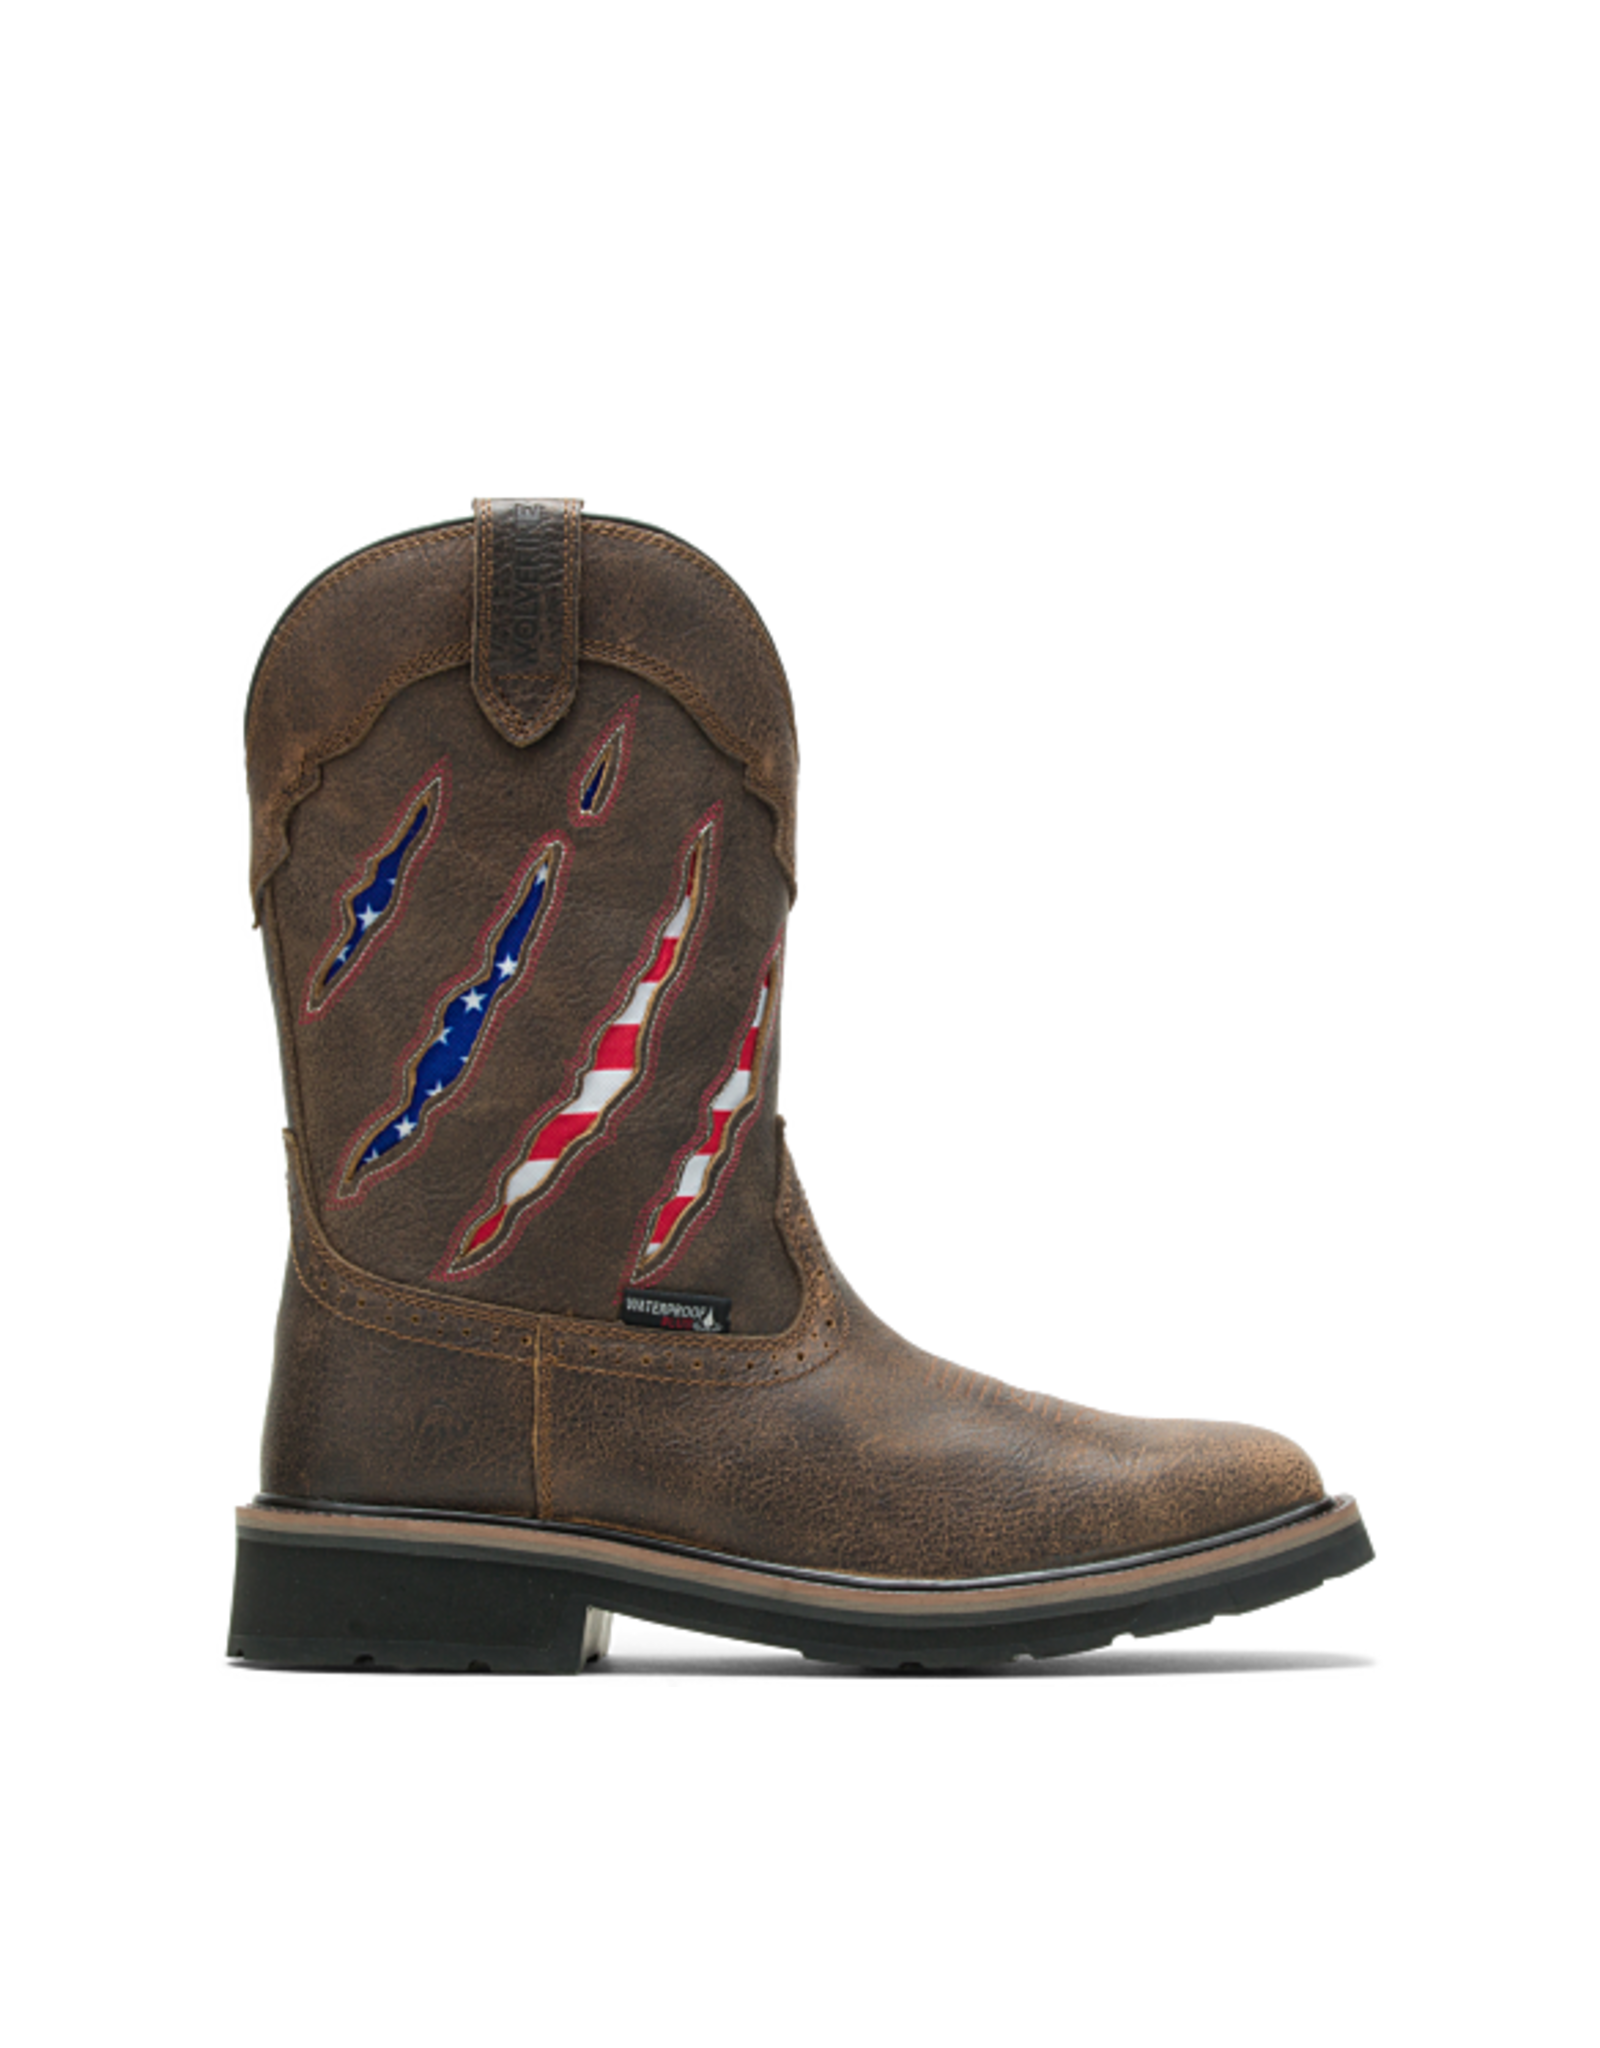 Wolverine Men's Rancher Claw American Flag W200138 Soft Toe Waterproof Work Boots